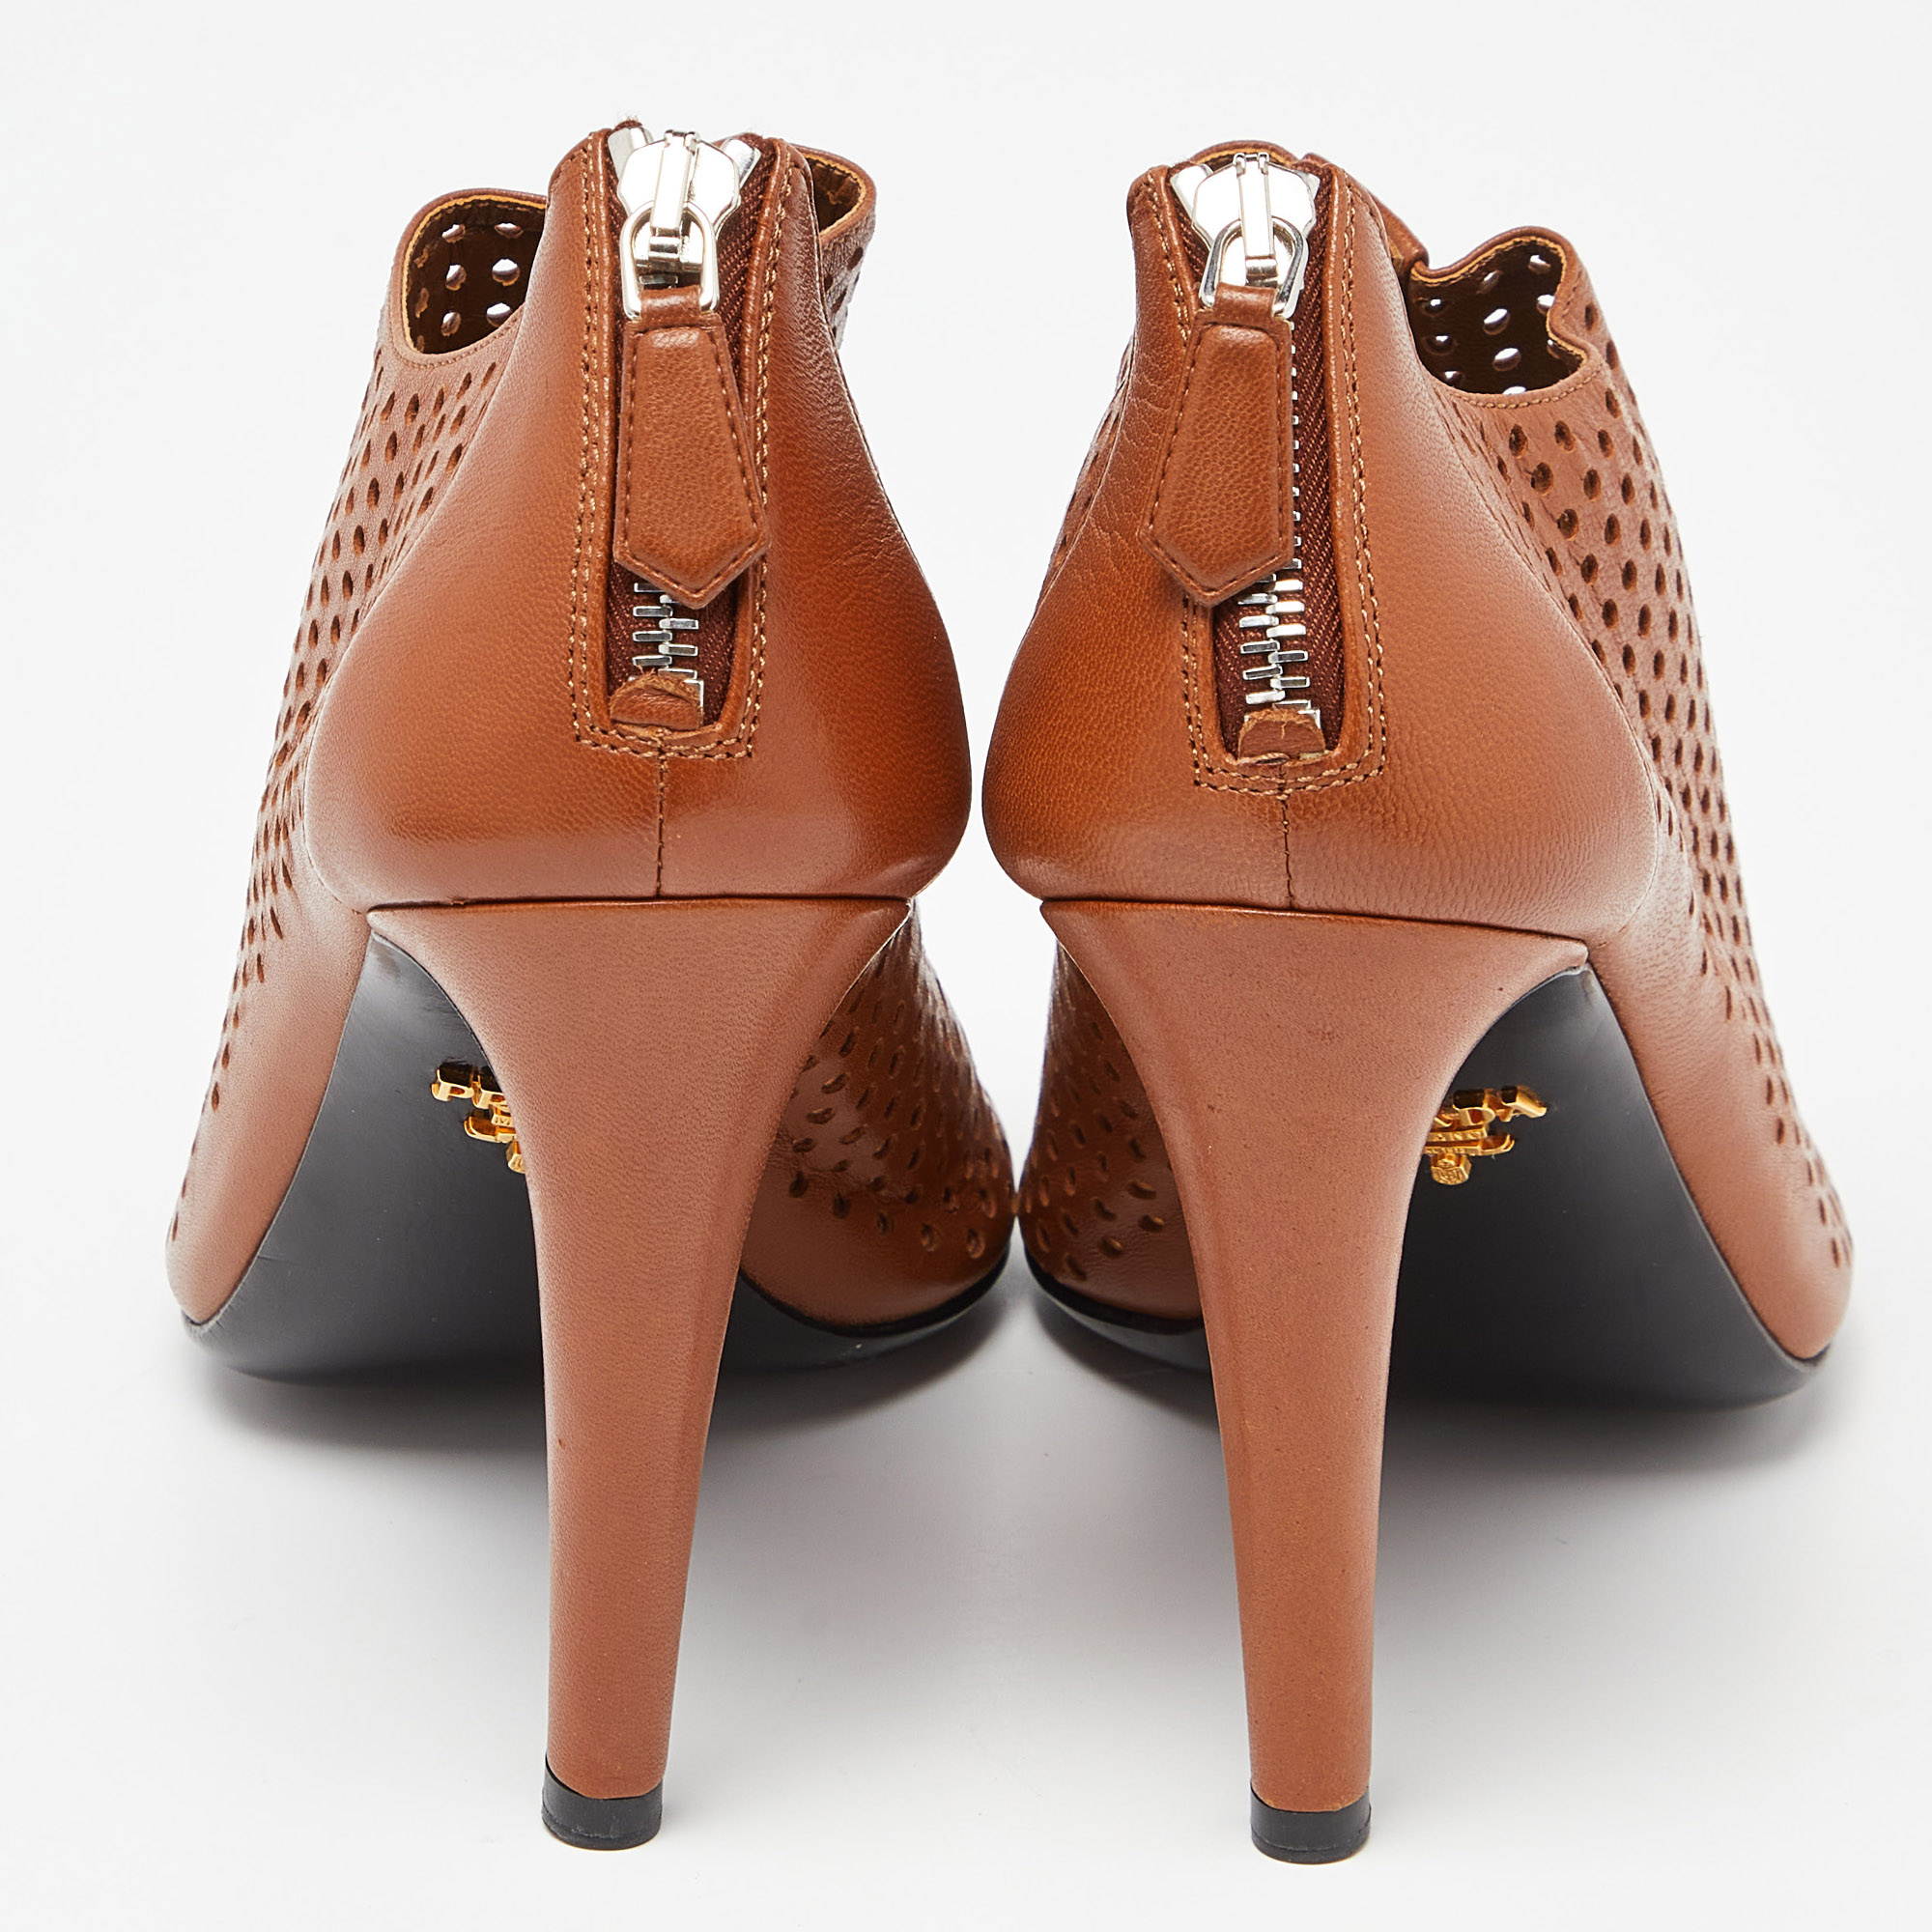 Prada Brown Perforated Leather Peep Toe Ankle Booties Size 39